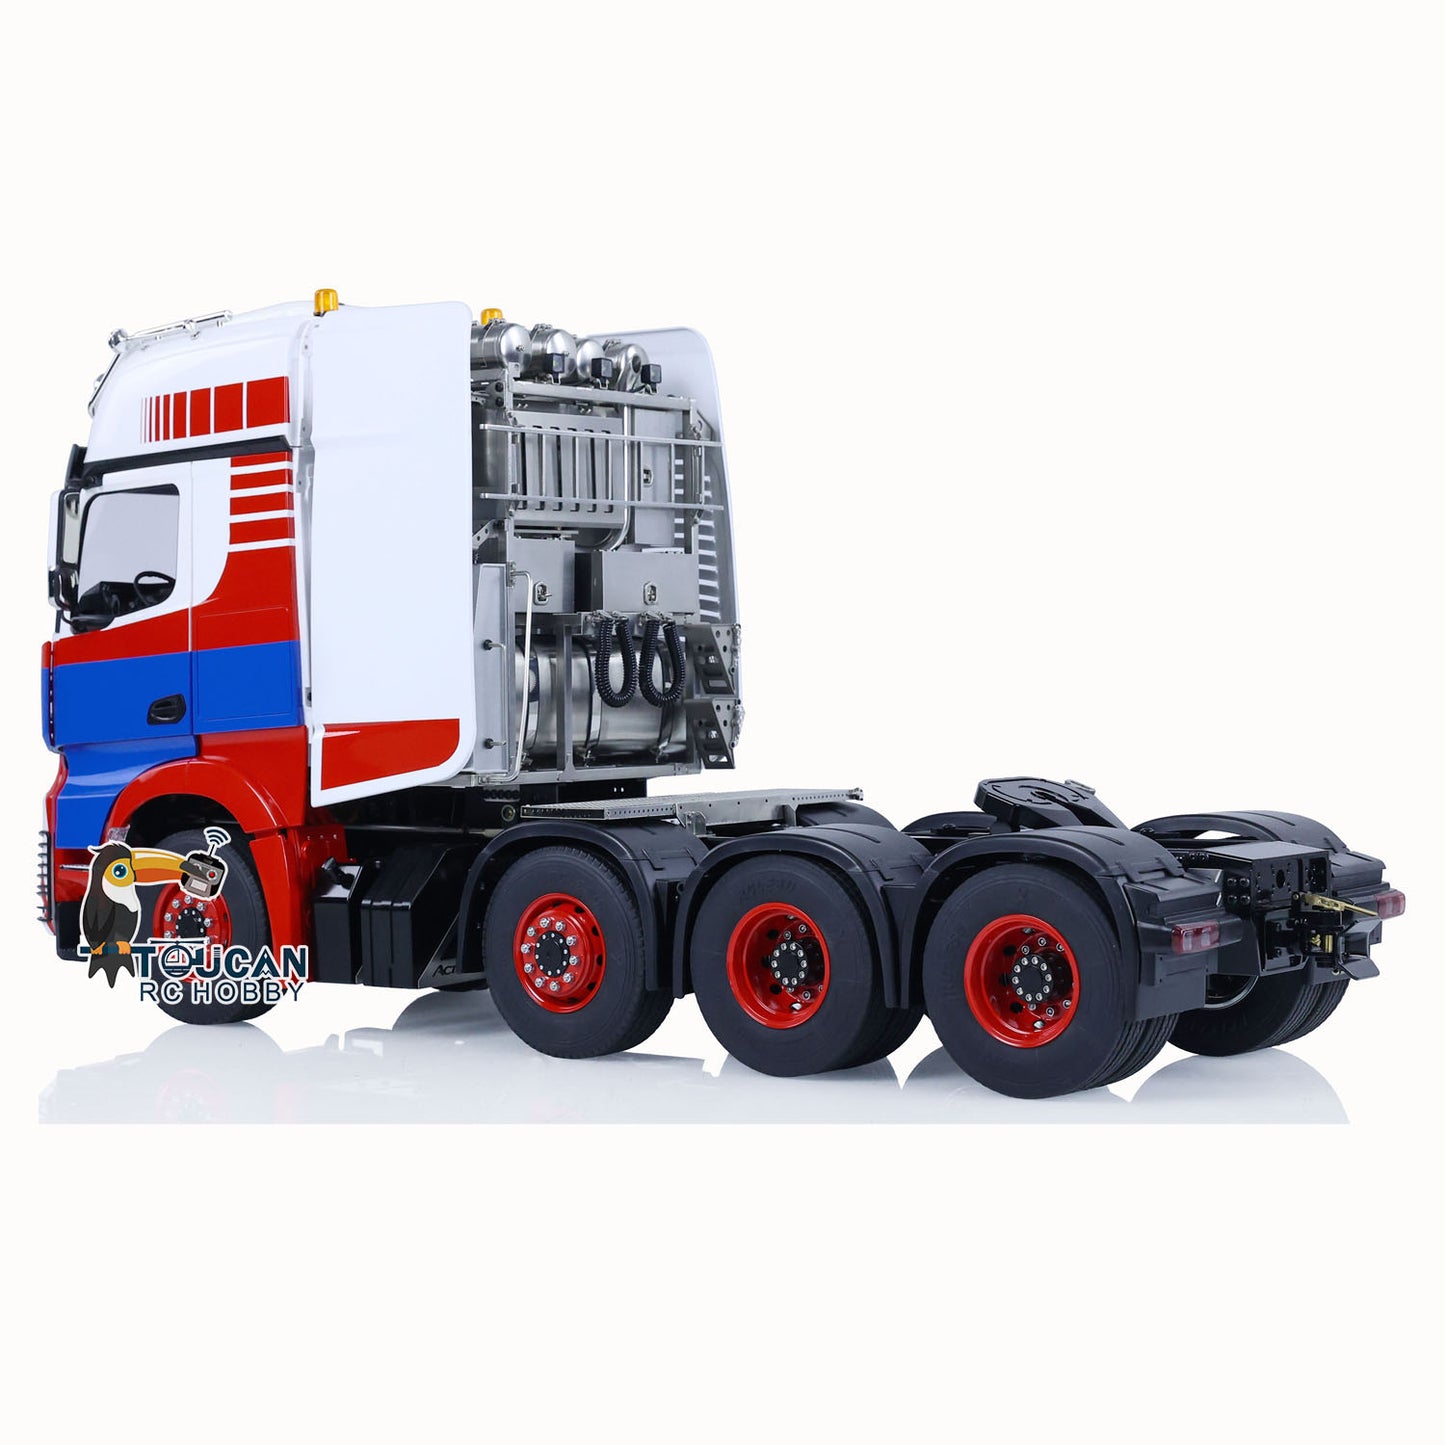 1/14 8x8 LESU RC Tractor Truck Radio Control Construction Vehicle DIY Electric Cars Metal Chassis Smoke Unit Sound 1851 3363